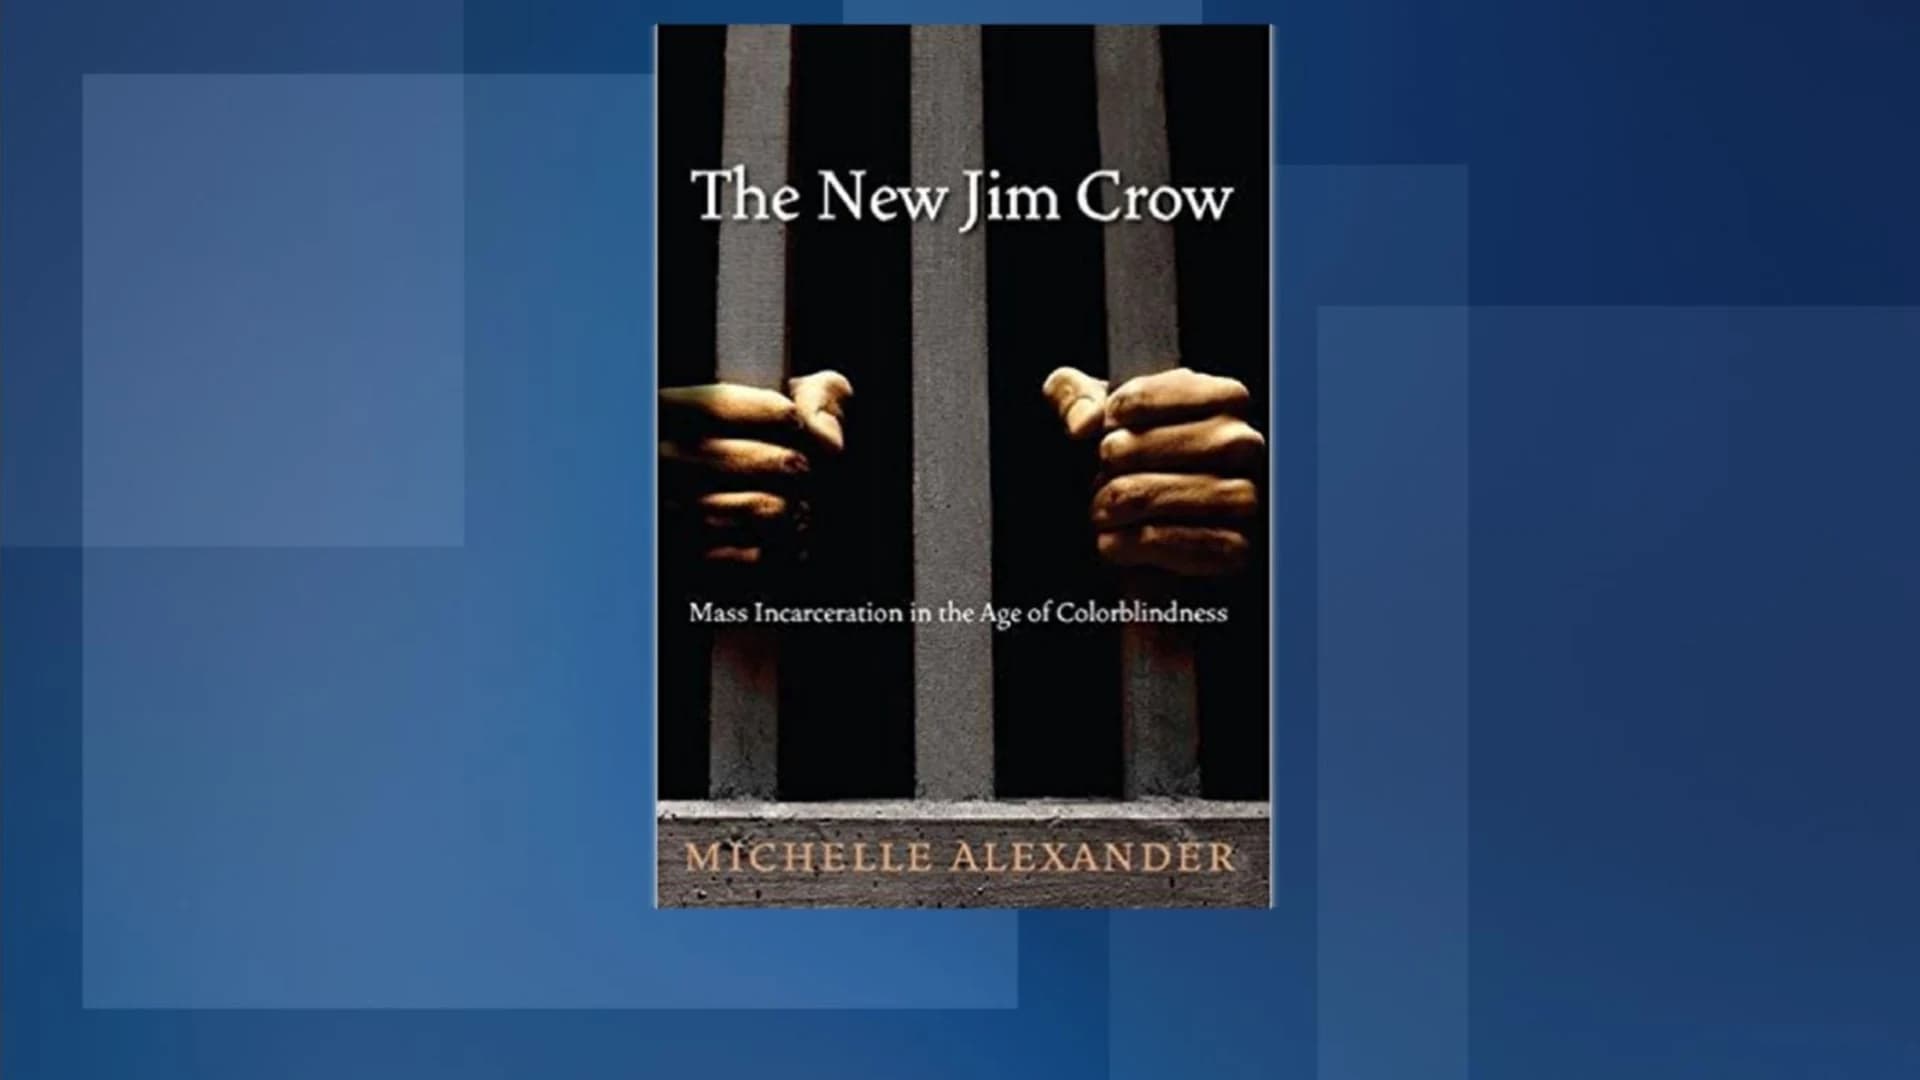 Ban on mass incarceration book lifted at 2 New Jersey jails